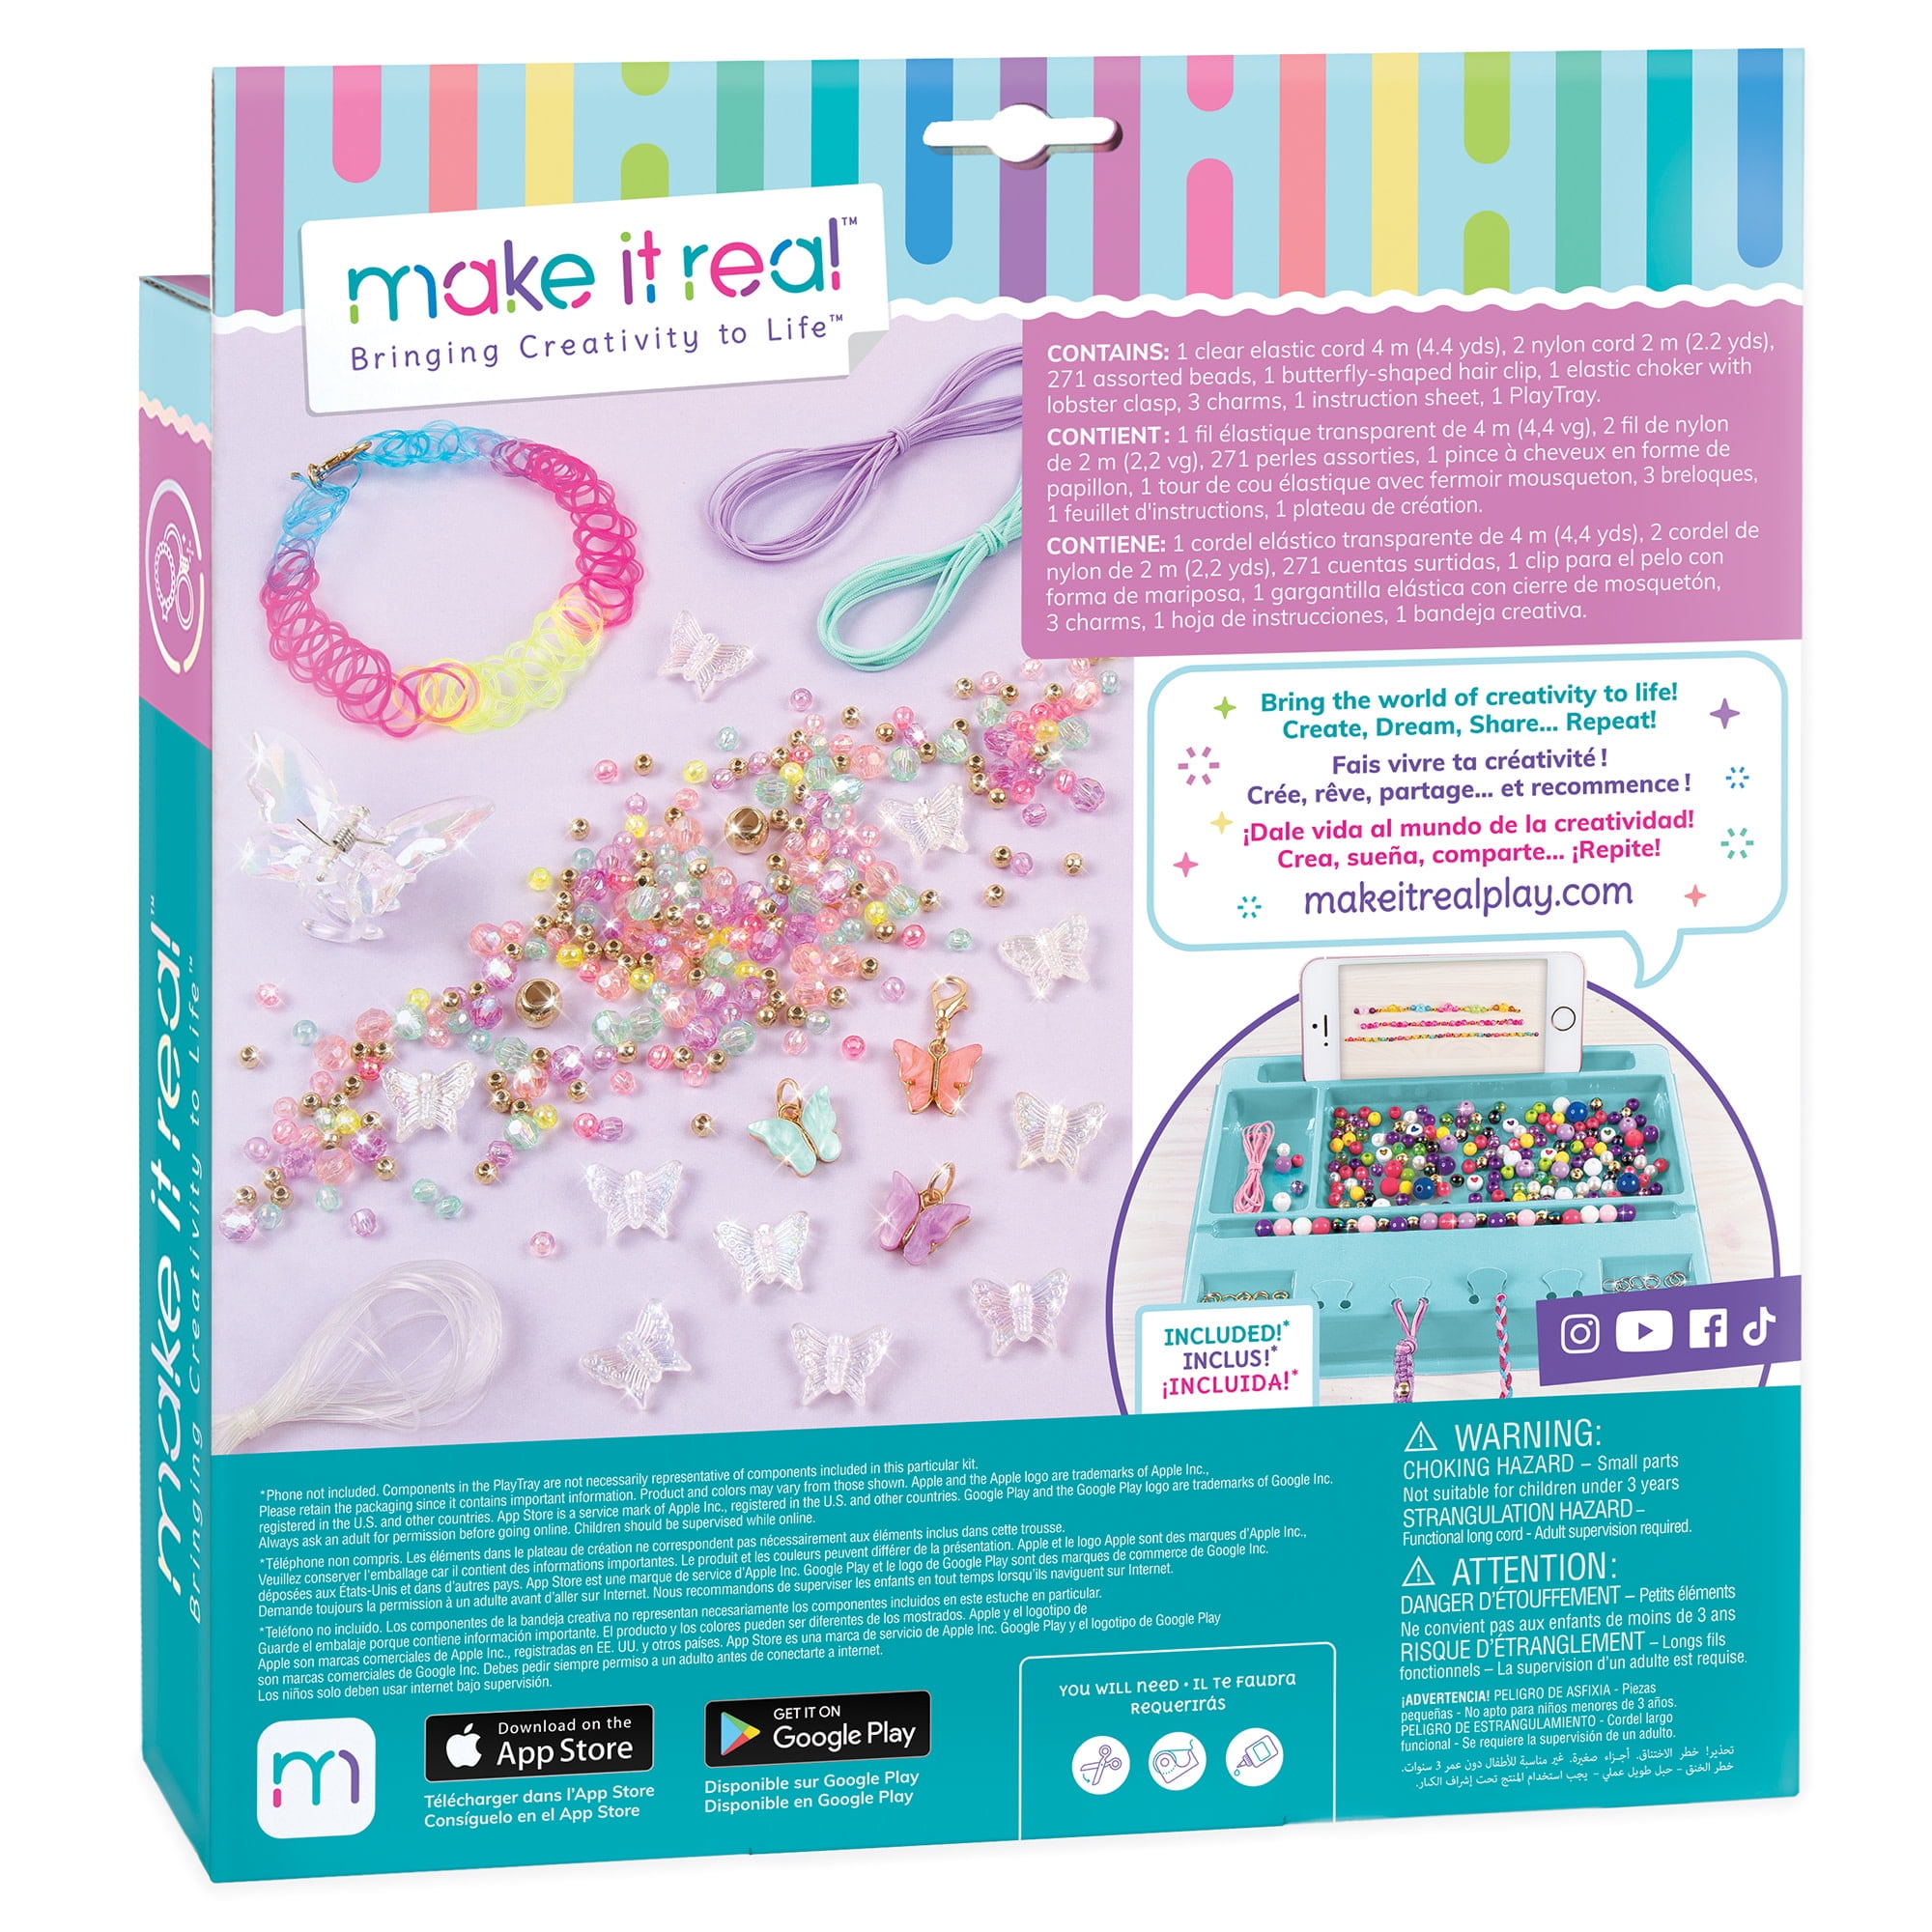 Make It Real: Butterfly DIY Jewelry Set - Create 7 Pieces of Jewelry,  Guides You to Design & Create Their Own Fashionable Jewelry, 281 Pieces,  Includes Play Tray, Tweens & Girls, Ages 8+ 